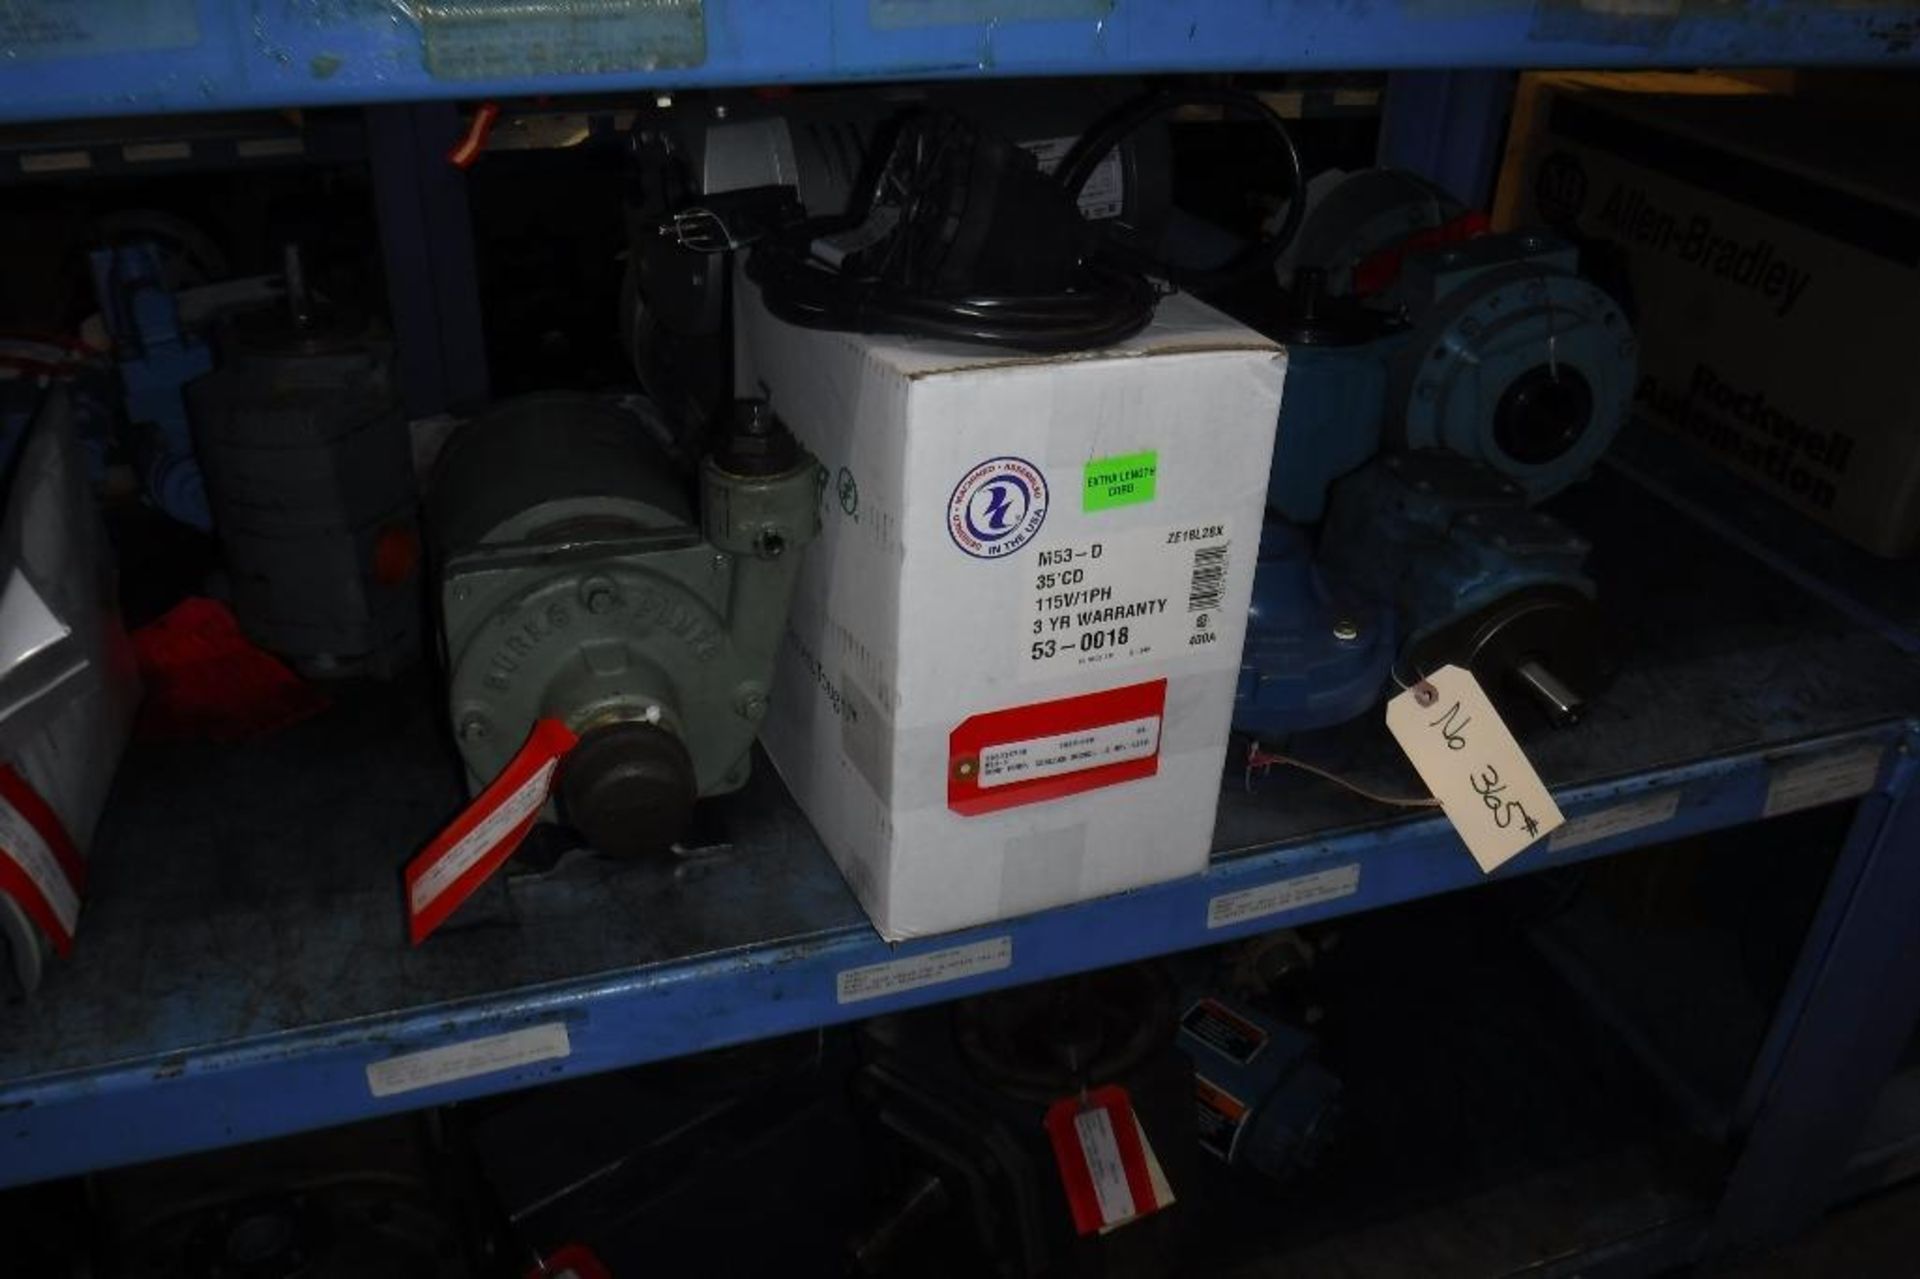 Contents of Rack 505S-Gear Boxes, Pumps, Etc., MUST REMOVE BY 2/14/20-MUST BE REMOVED IN THE ENTIRIT - Image 13 of 34